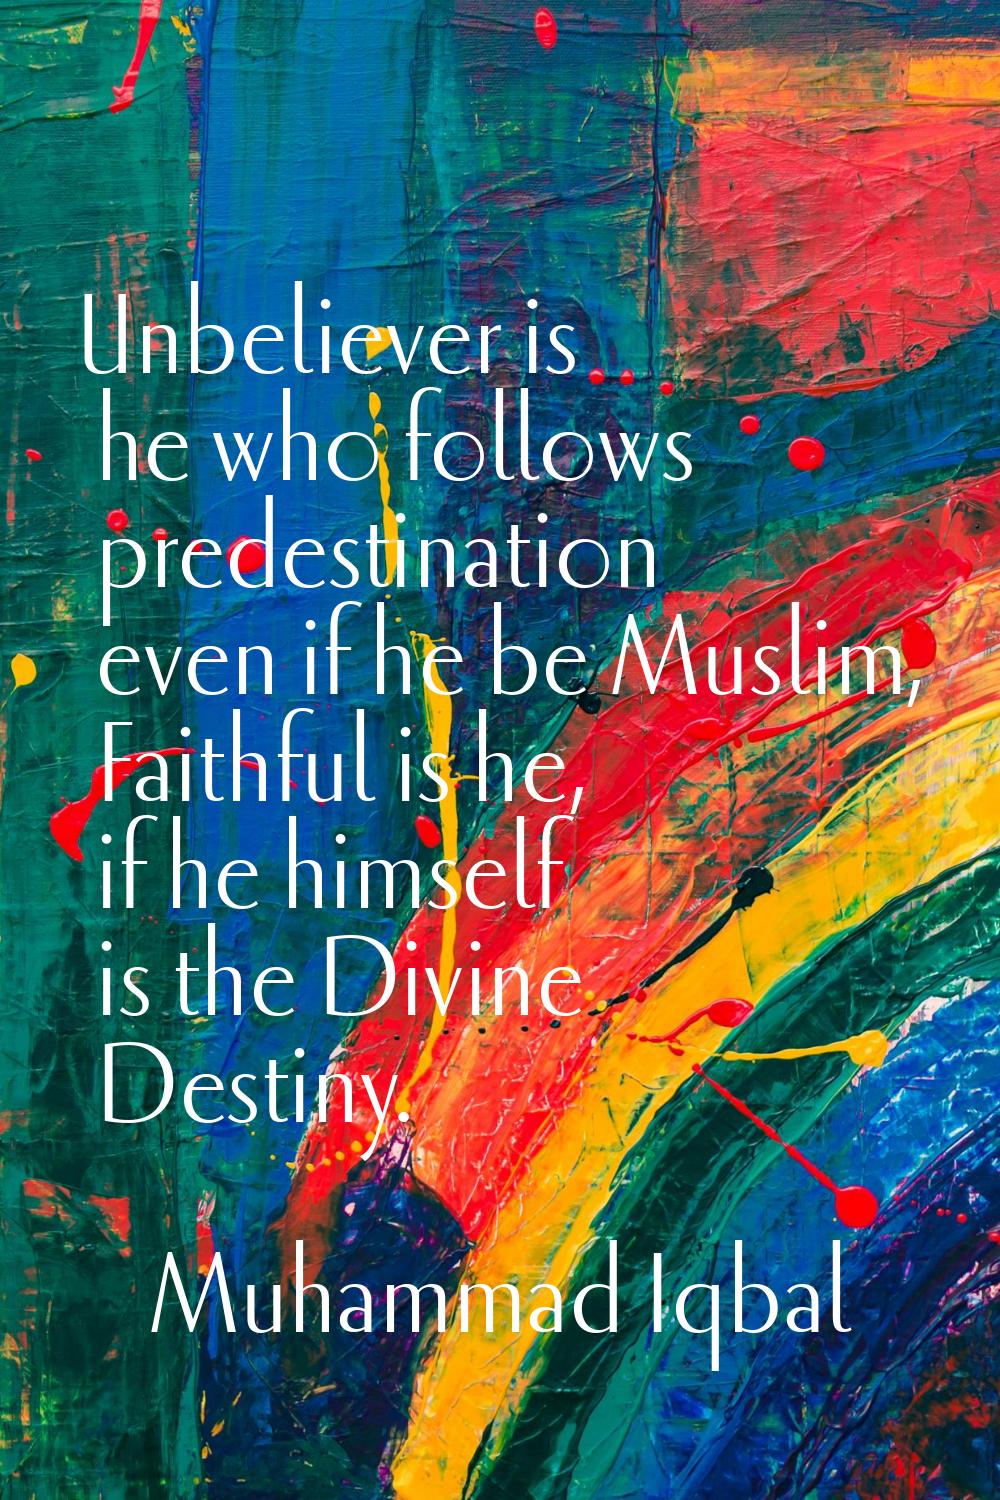 Unbeliever is he who follows predestination even if he be Muslim, Faithful is he, if he himself is 